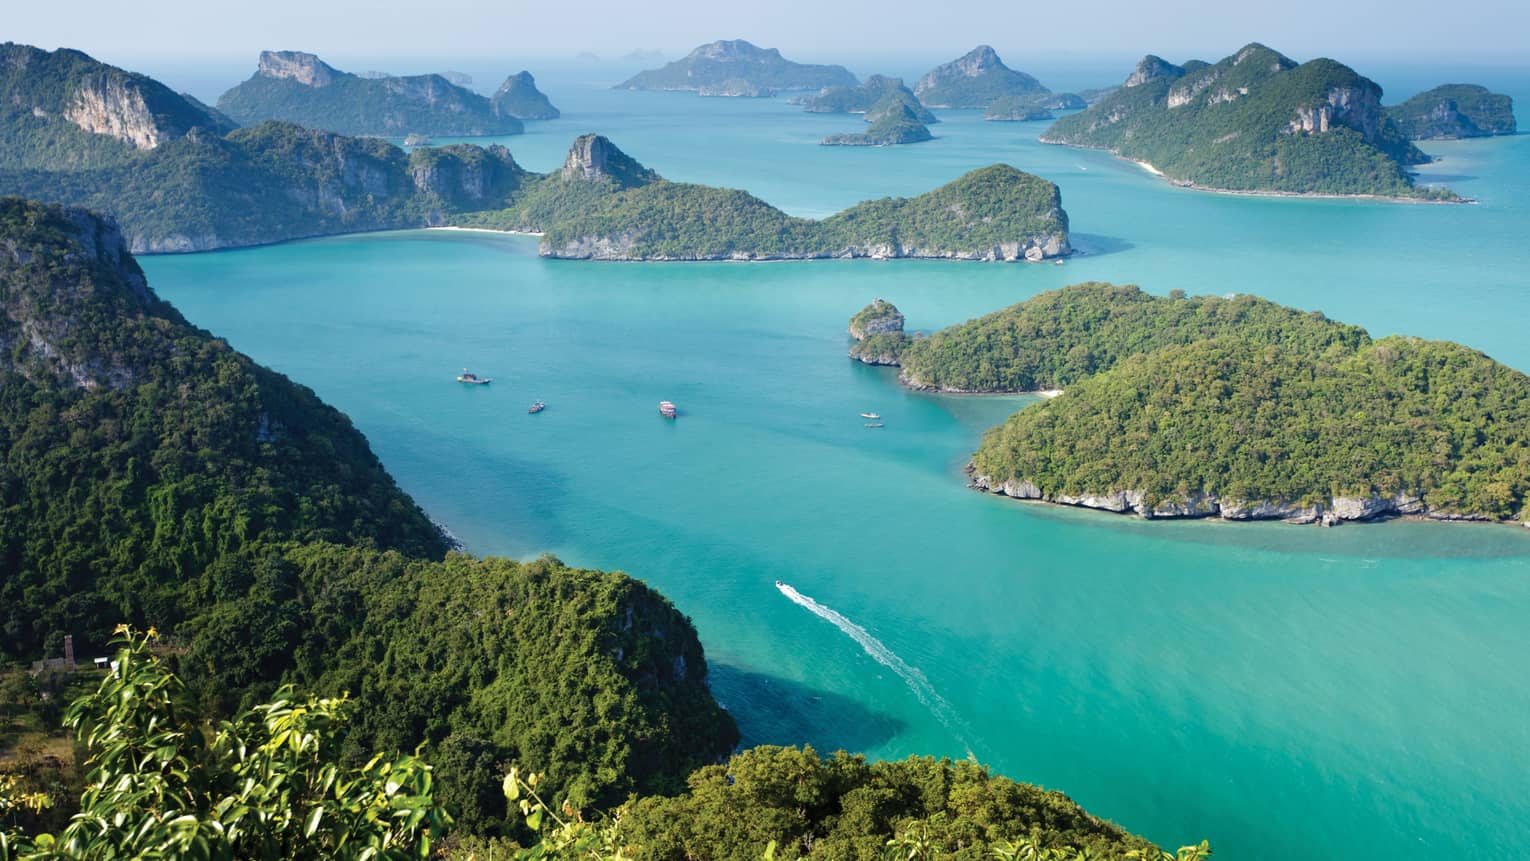 Aerial view of a dozen lush, forested, hilly islands of different sizes surrounded by calm turquoise water dotted with boats.